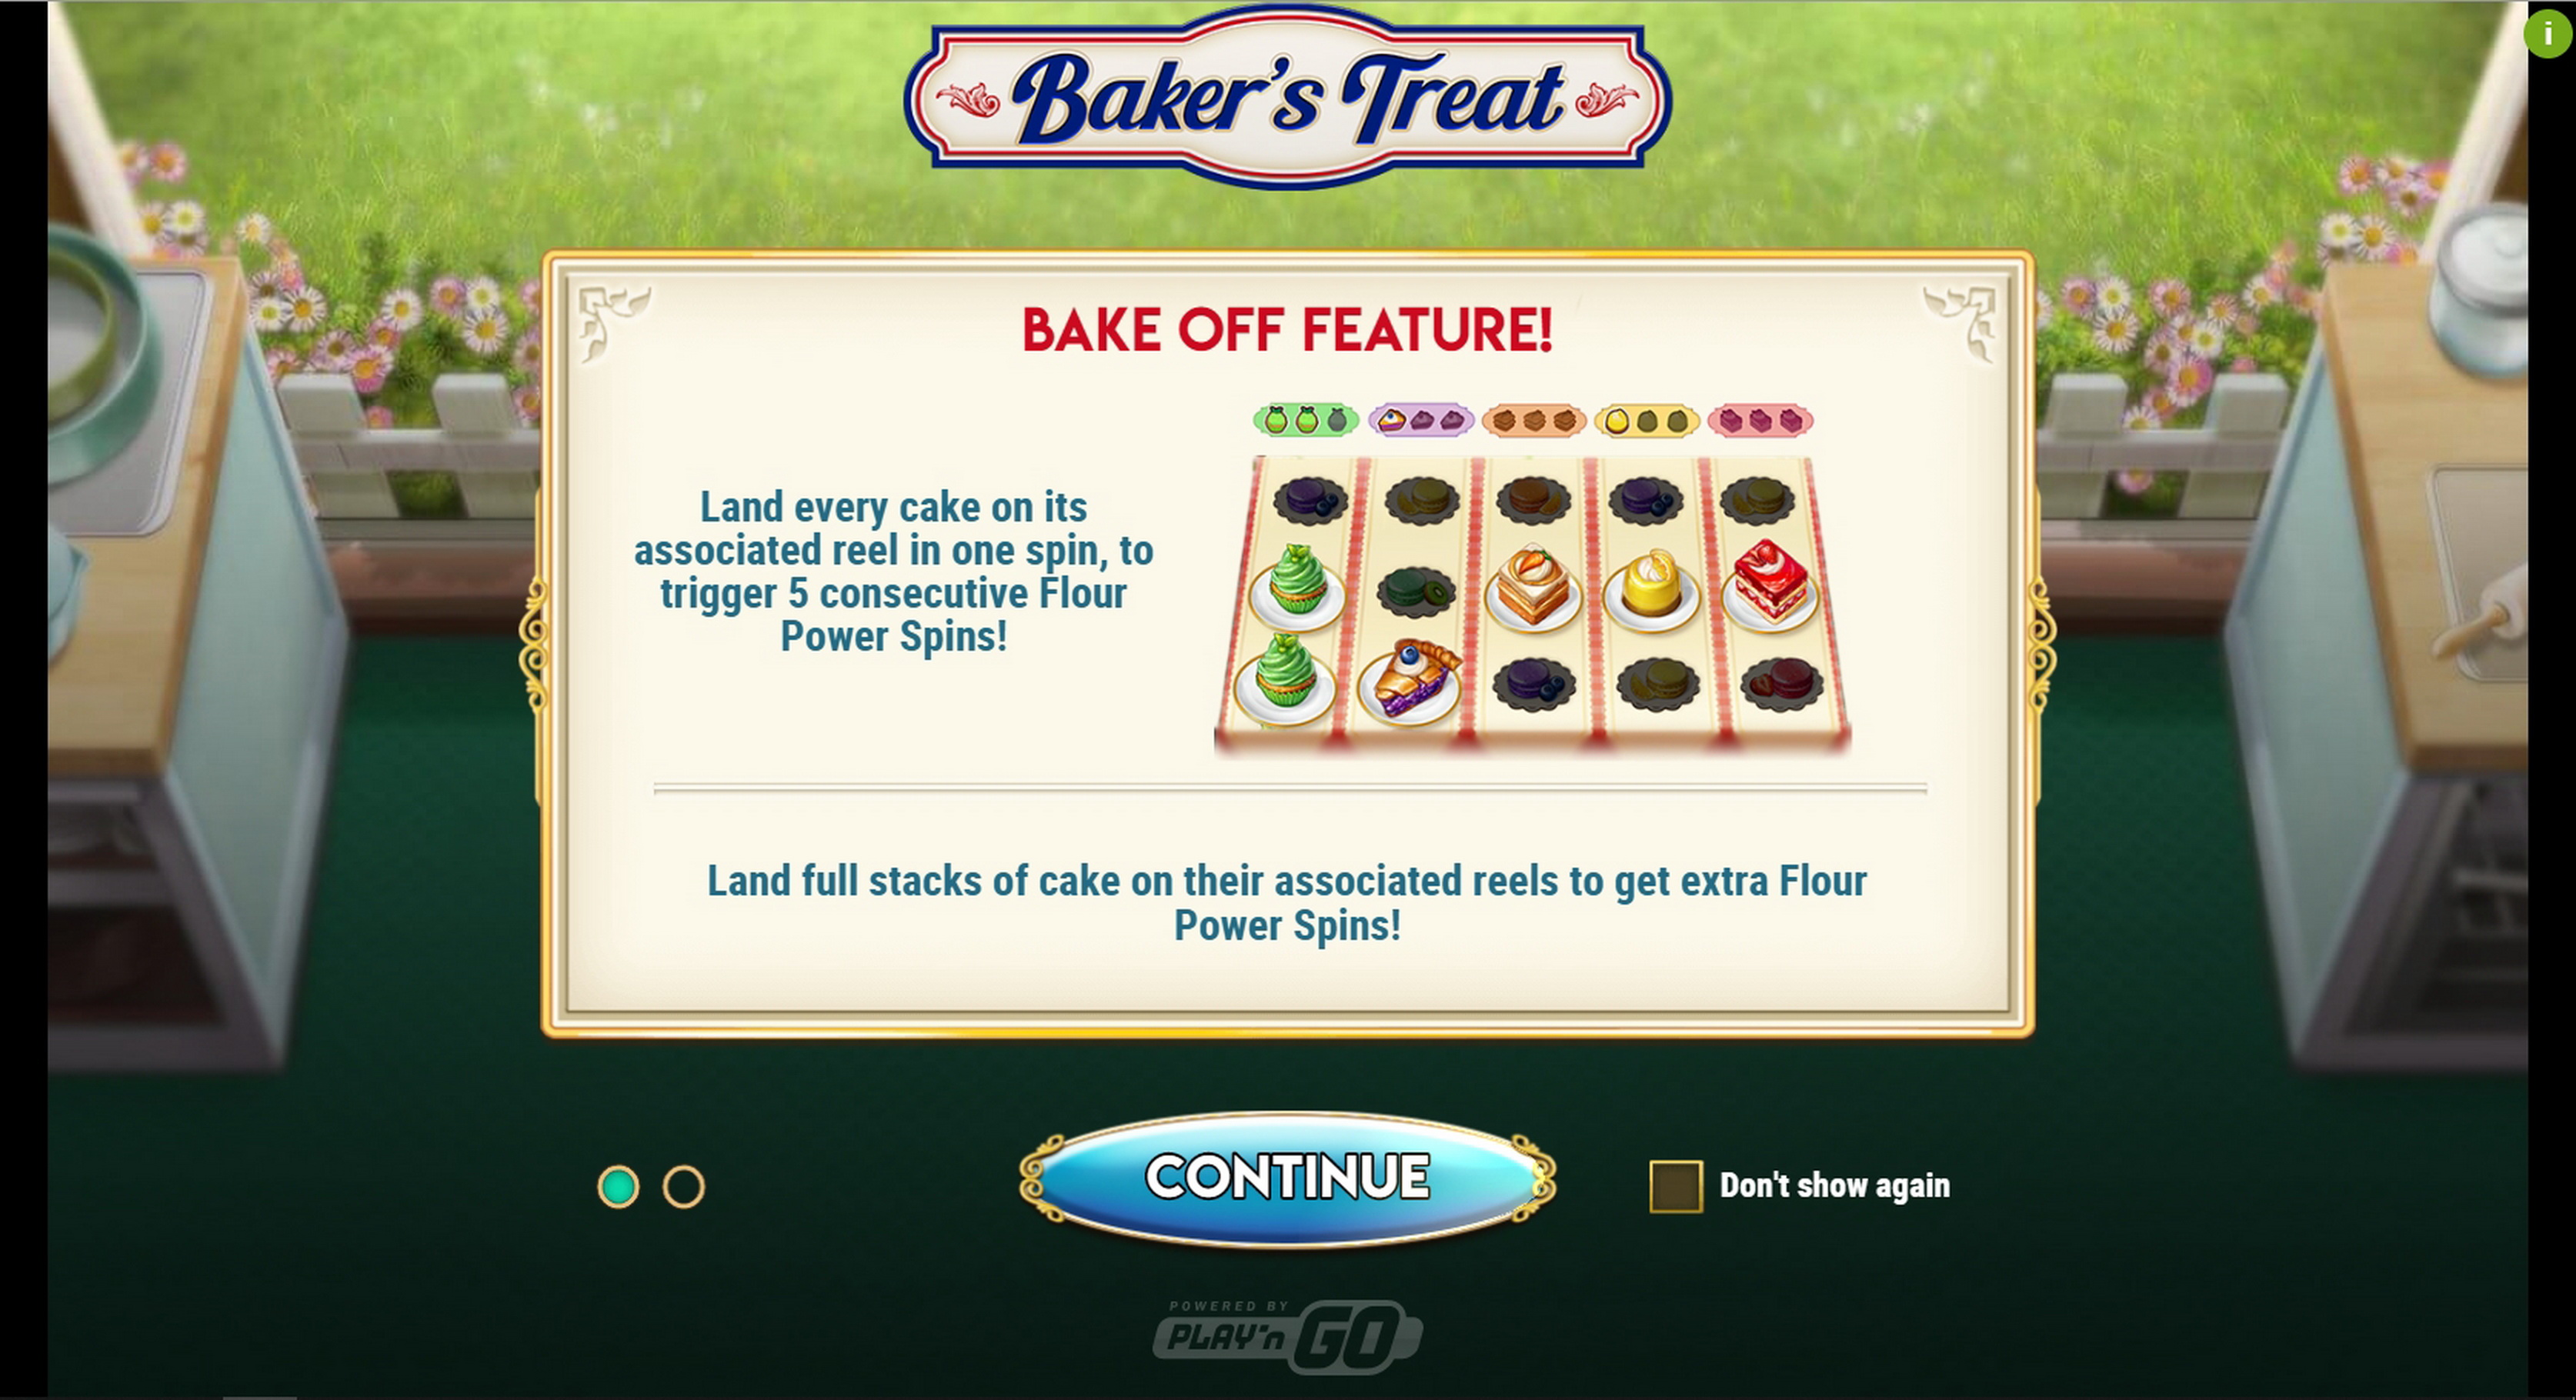 Play Baker's Treat Free Casino Slot Game by Playn GO